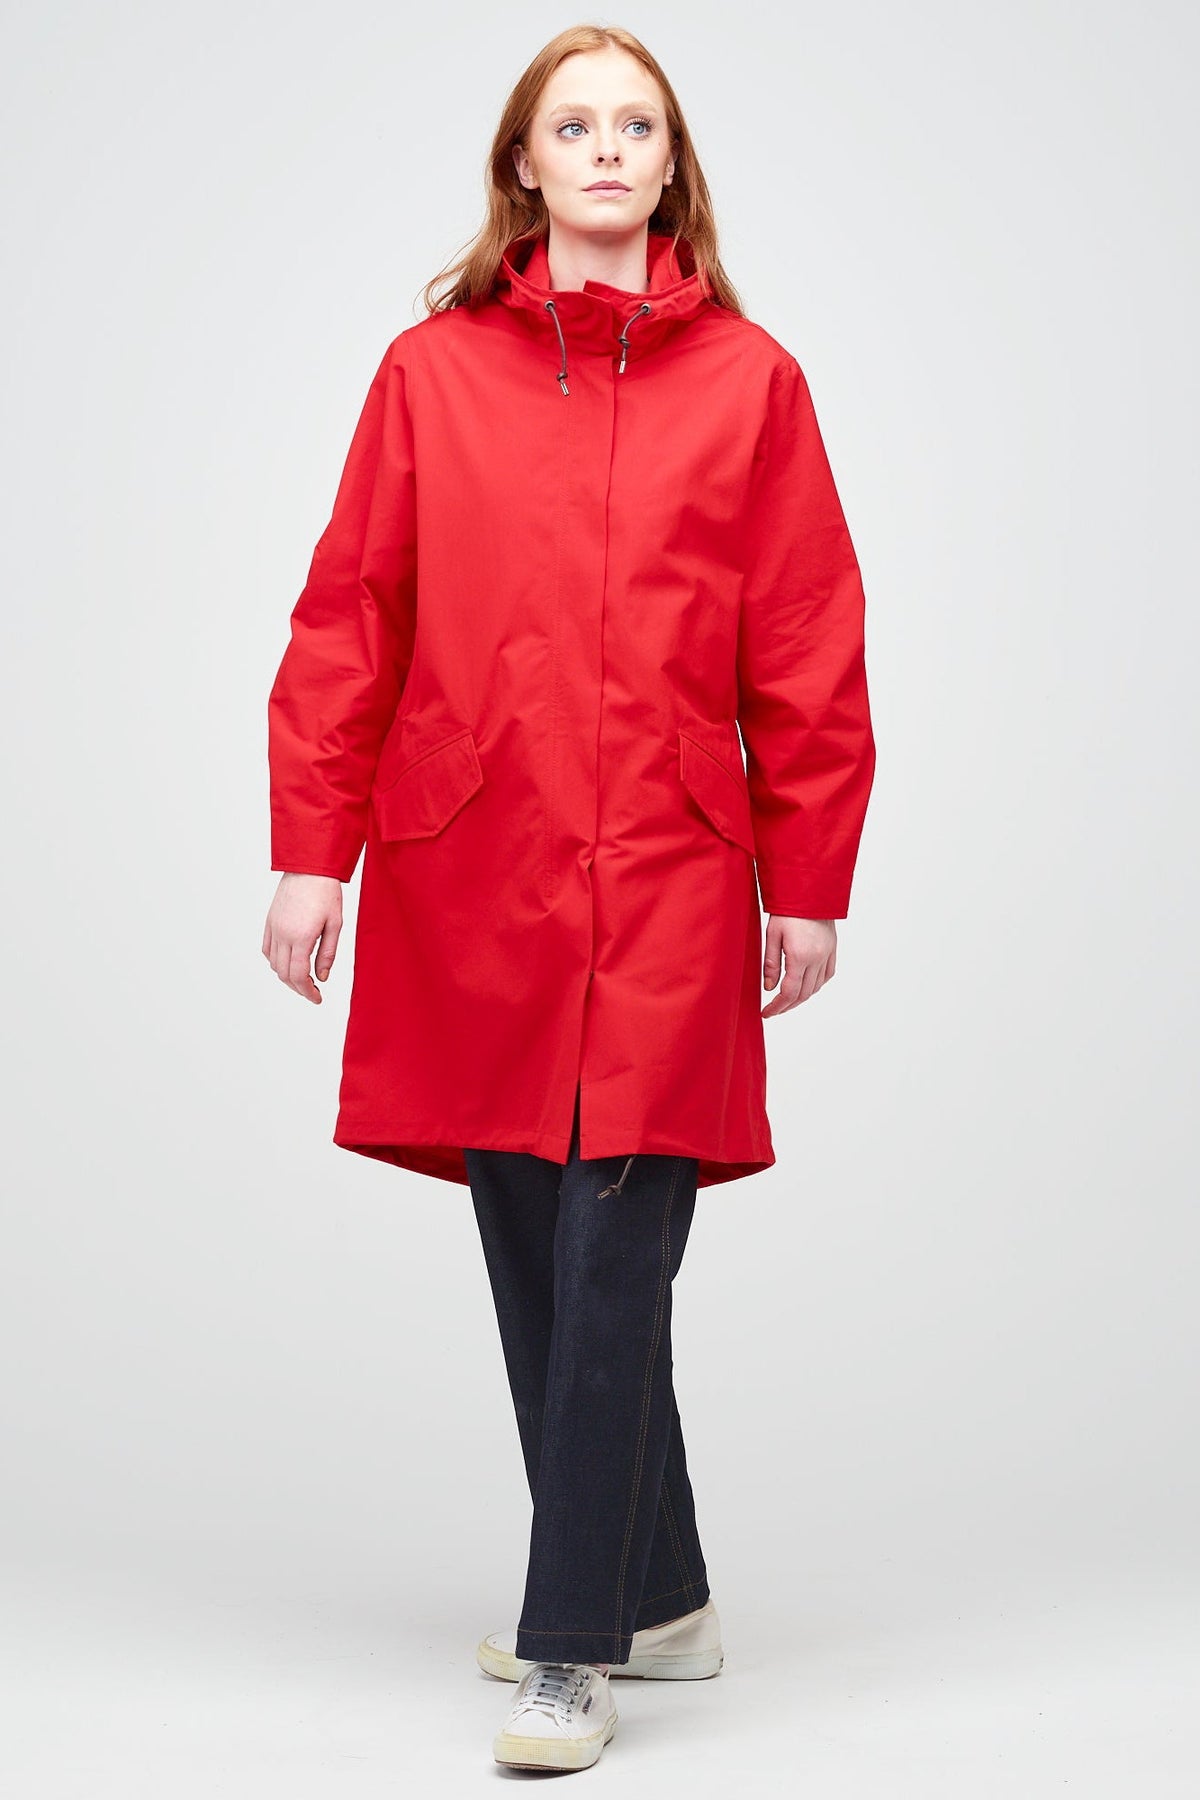 
            A young, white female model with ginger hair wearing long red parka fully zipped up. The parka is styled with indigo jeans and a white trainer.